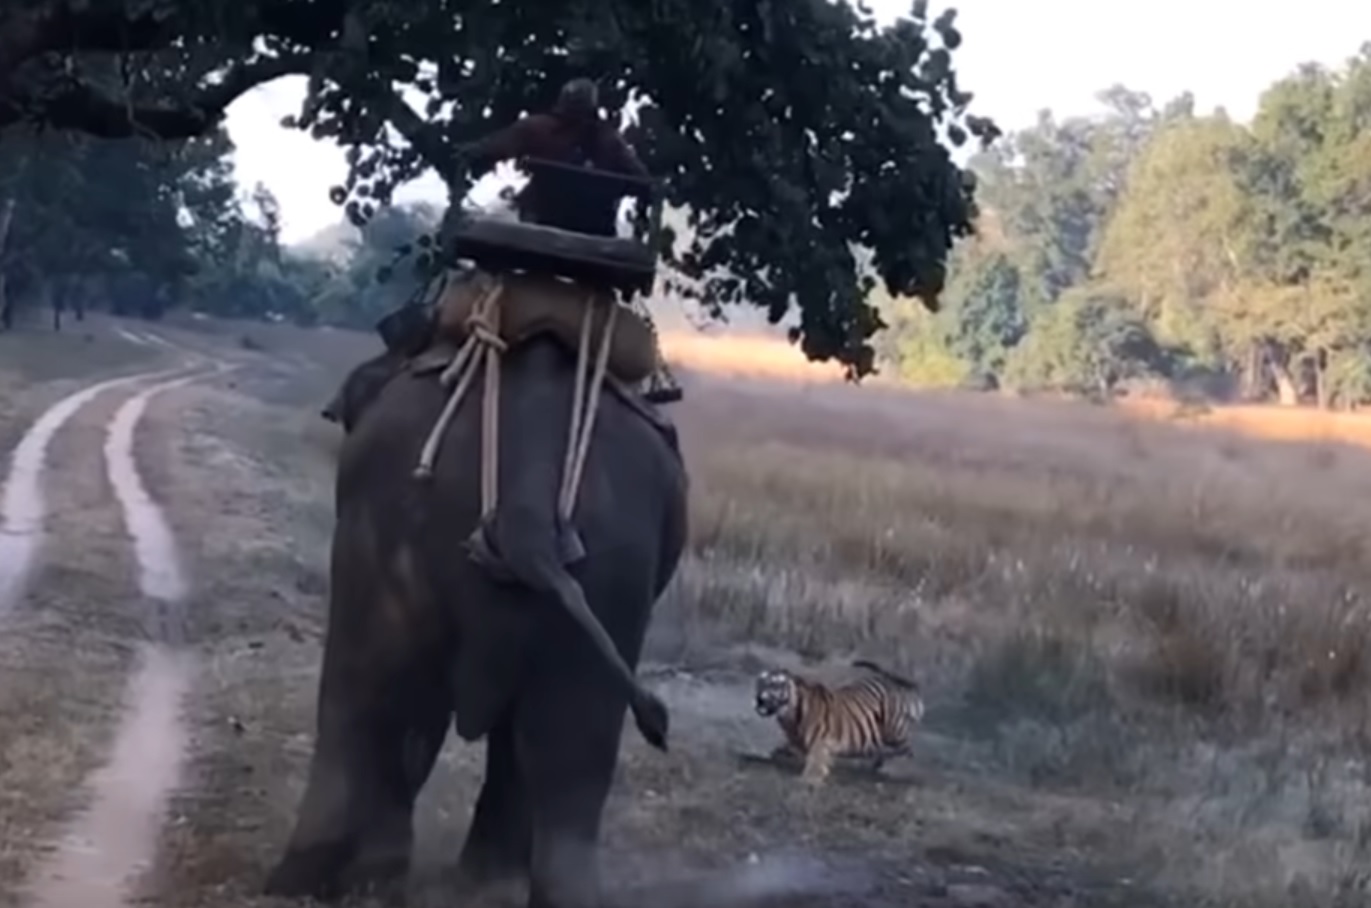 Man's Scary Experience As Tiger Charges At Elephant